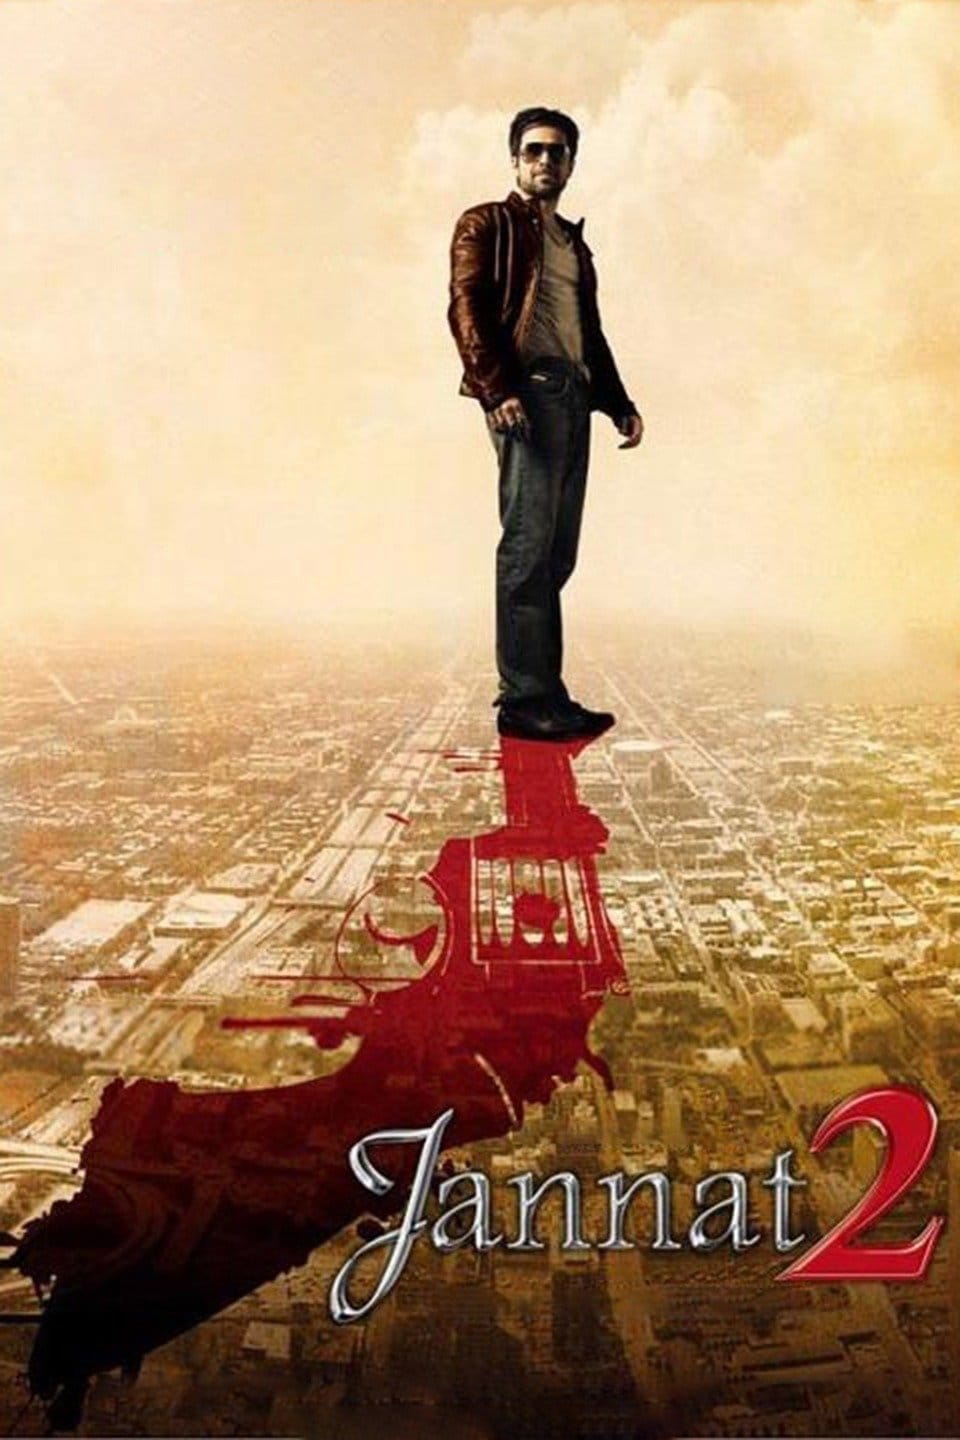 Poster for the movie "Jannat 2"